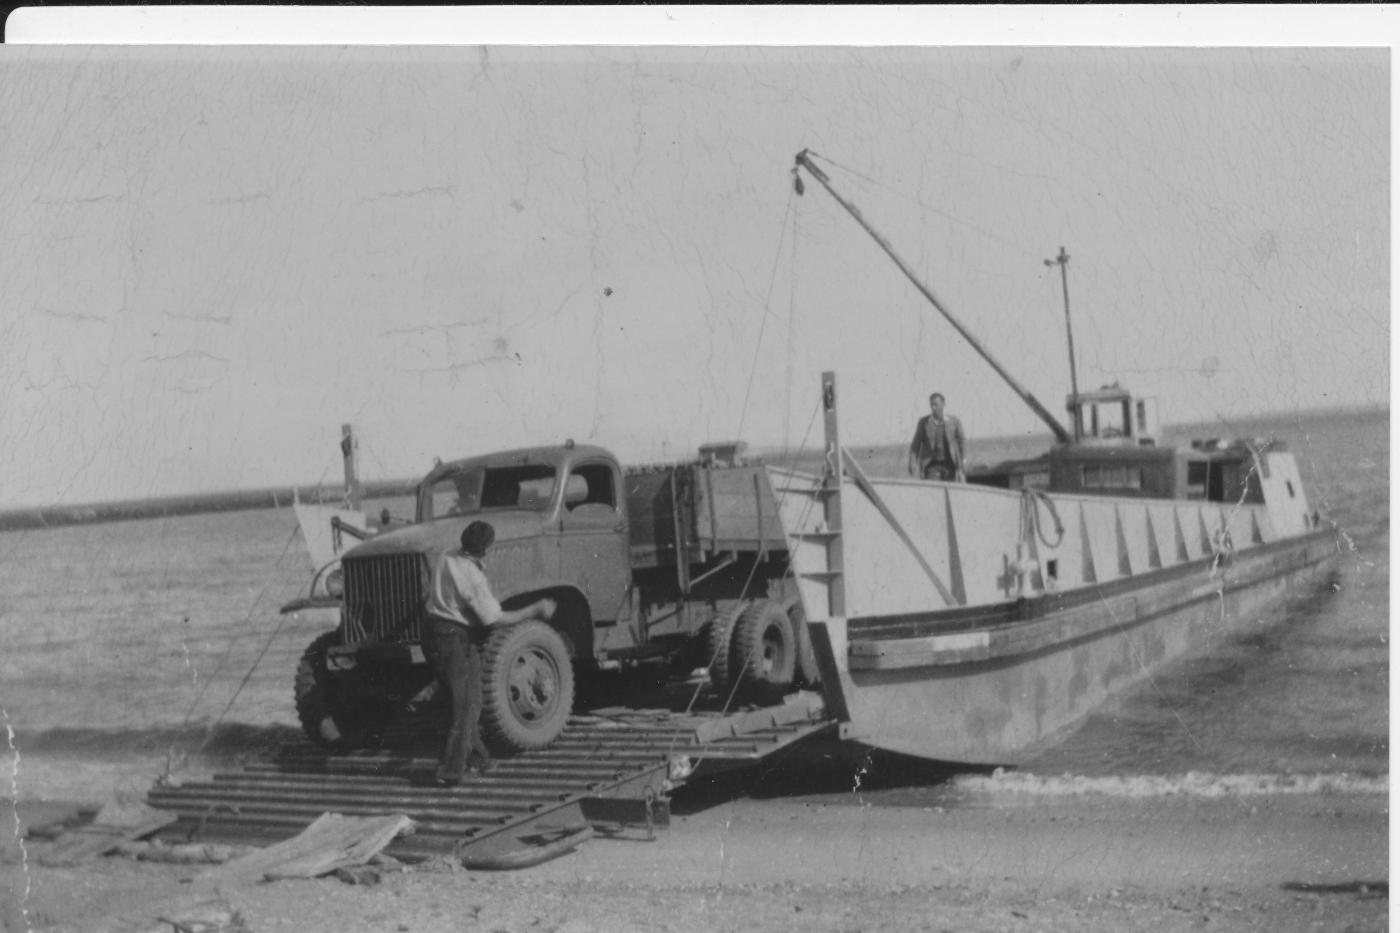 Sand trucks being unloaded from the barge onto the beach ca 1957